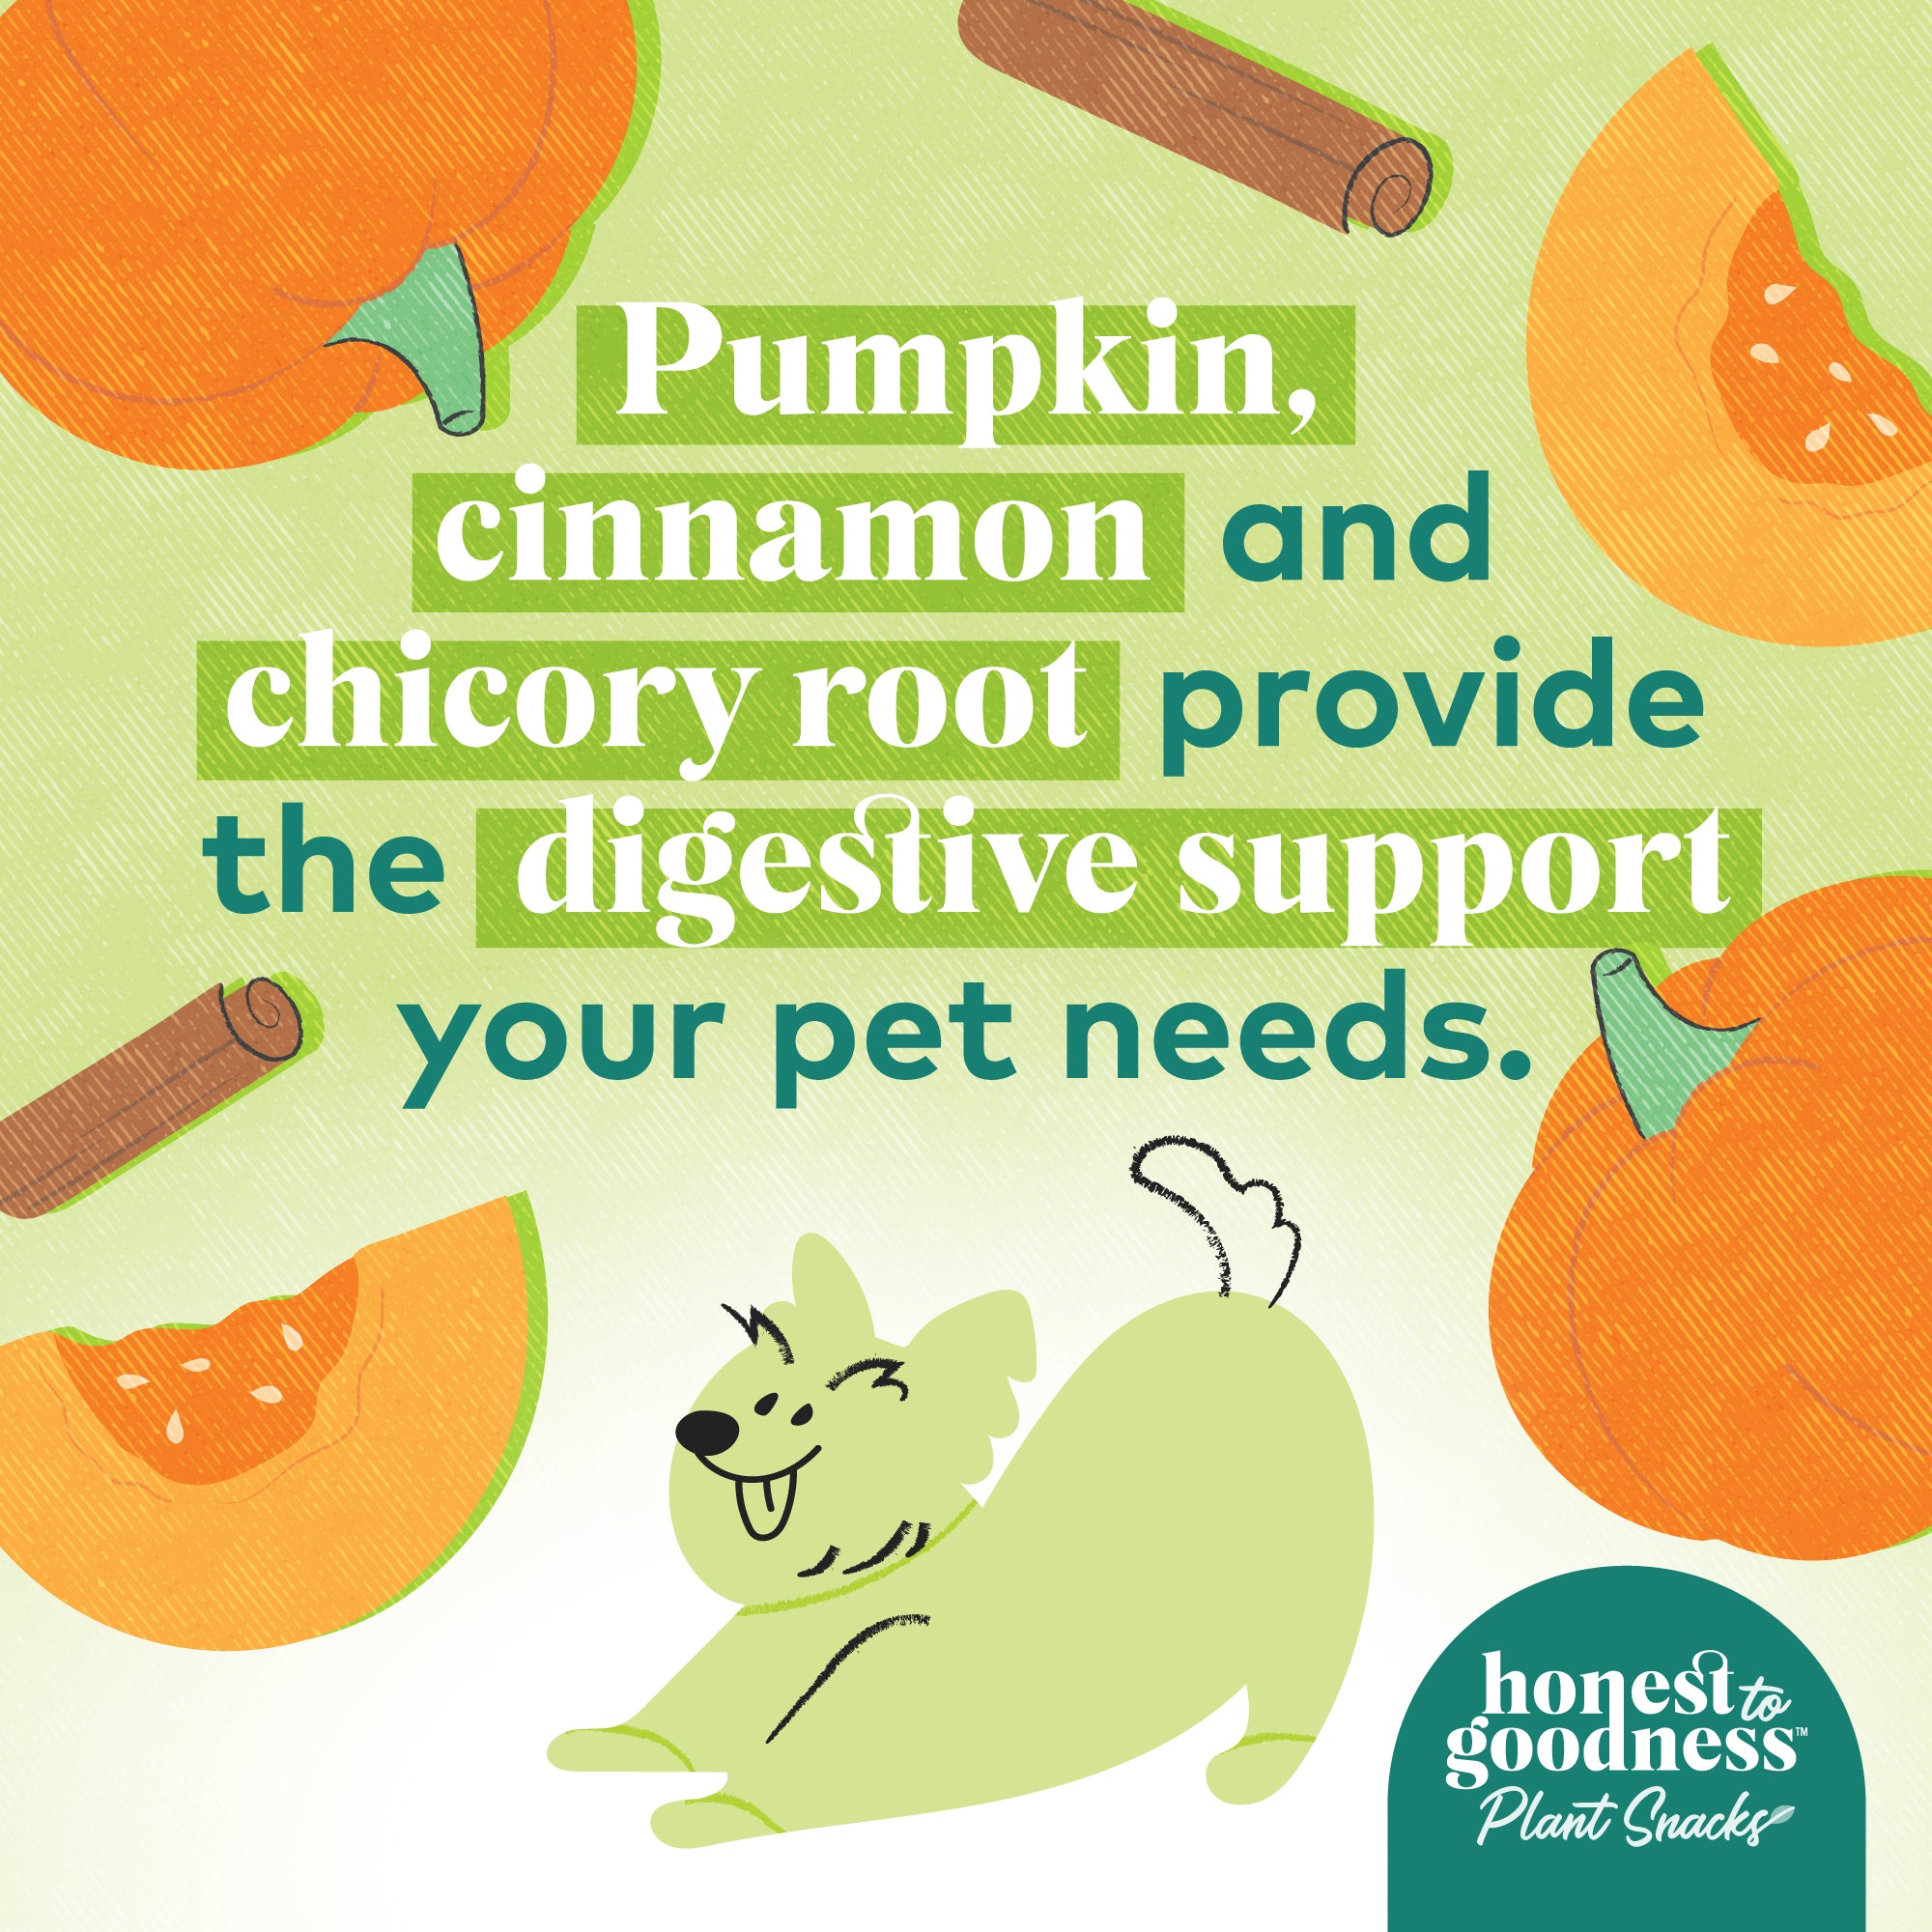 Pumpkin, cinnamon and chicory root provide the digestive support your pets need.